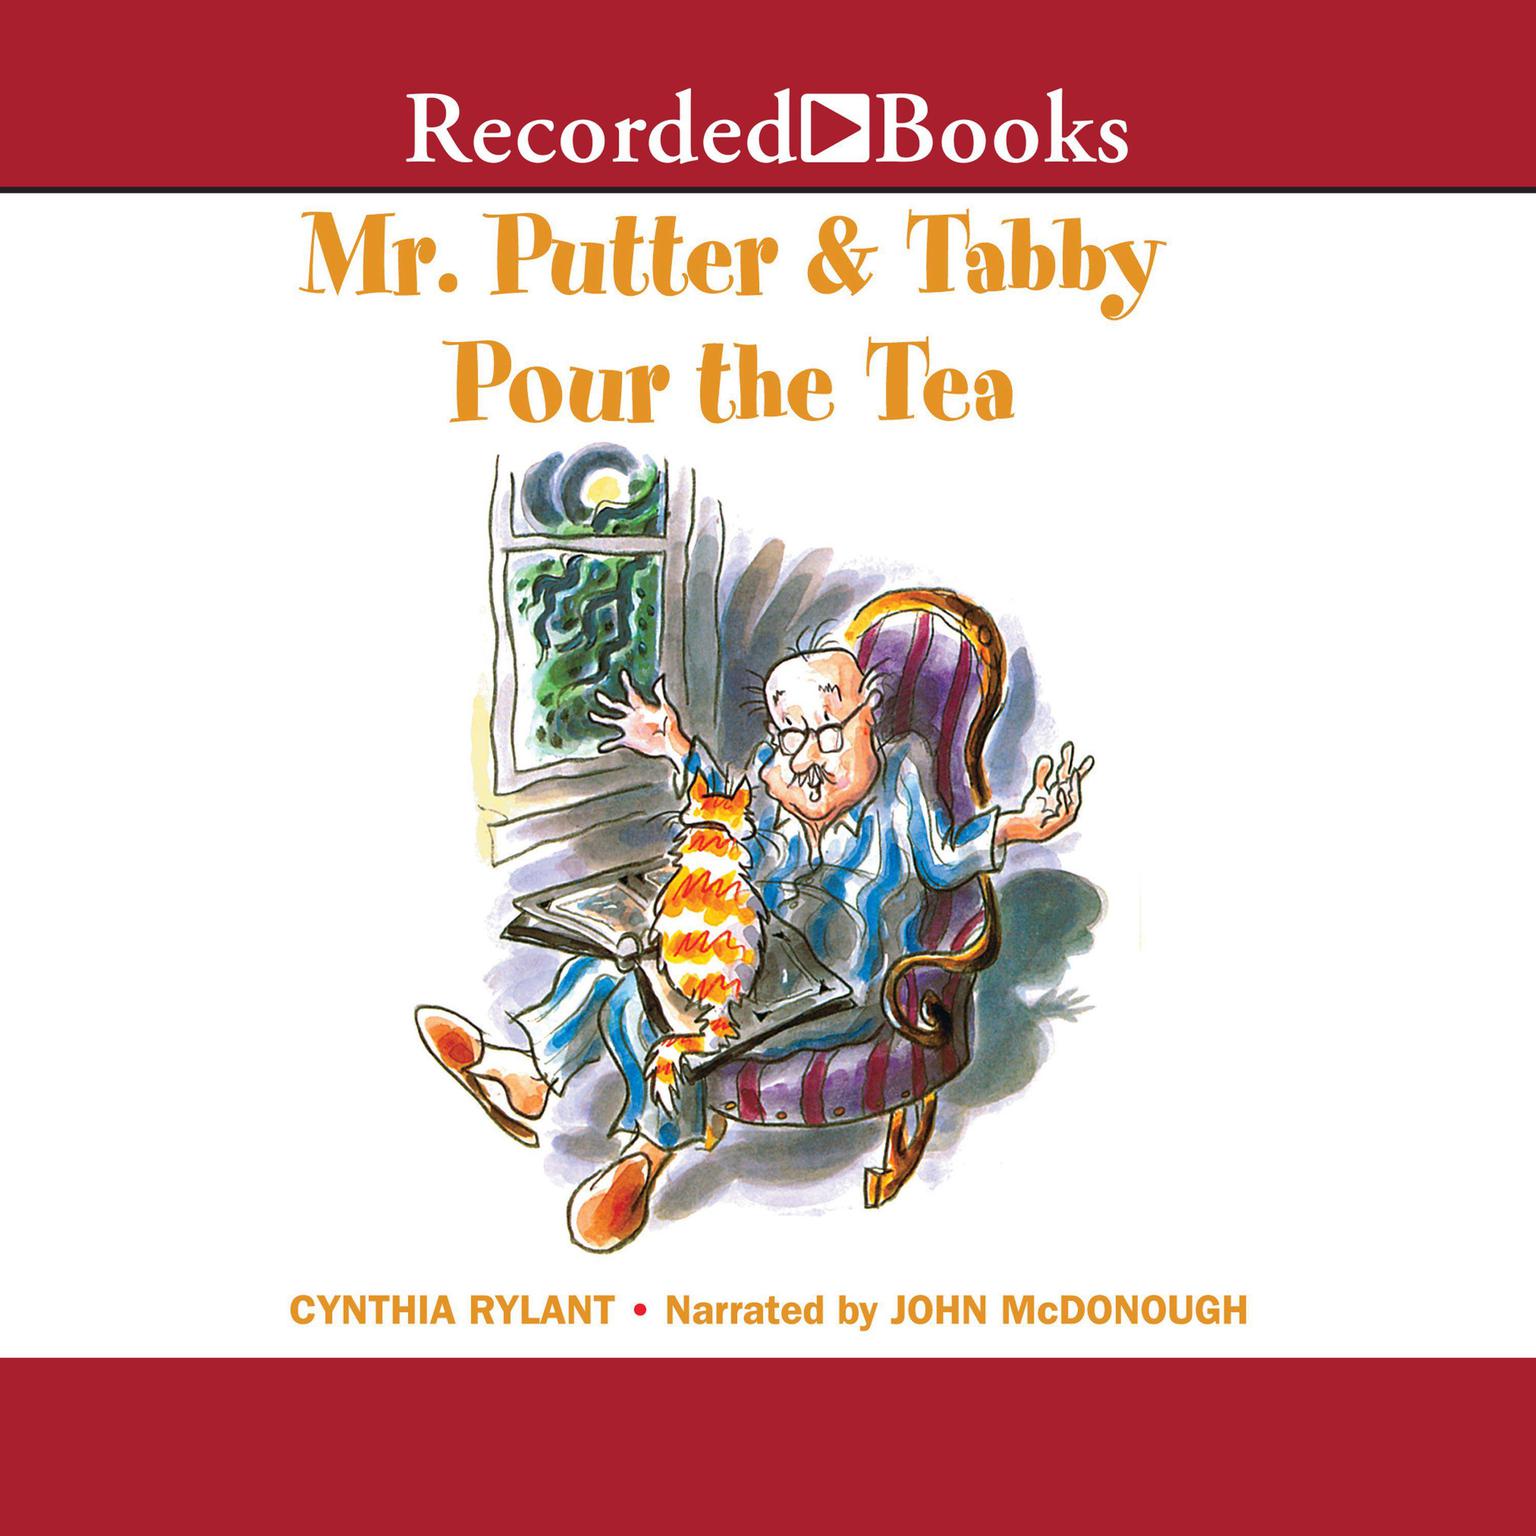 Mr. Putter & Tabby Pour the Tea Audiobook, by Cynthia Rylant